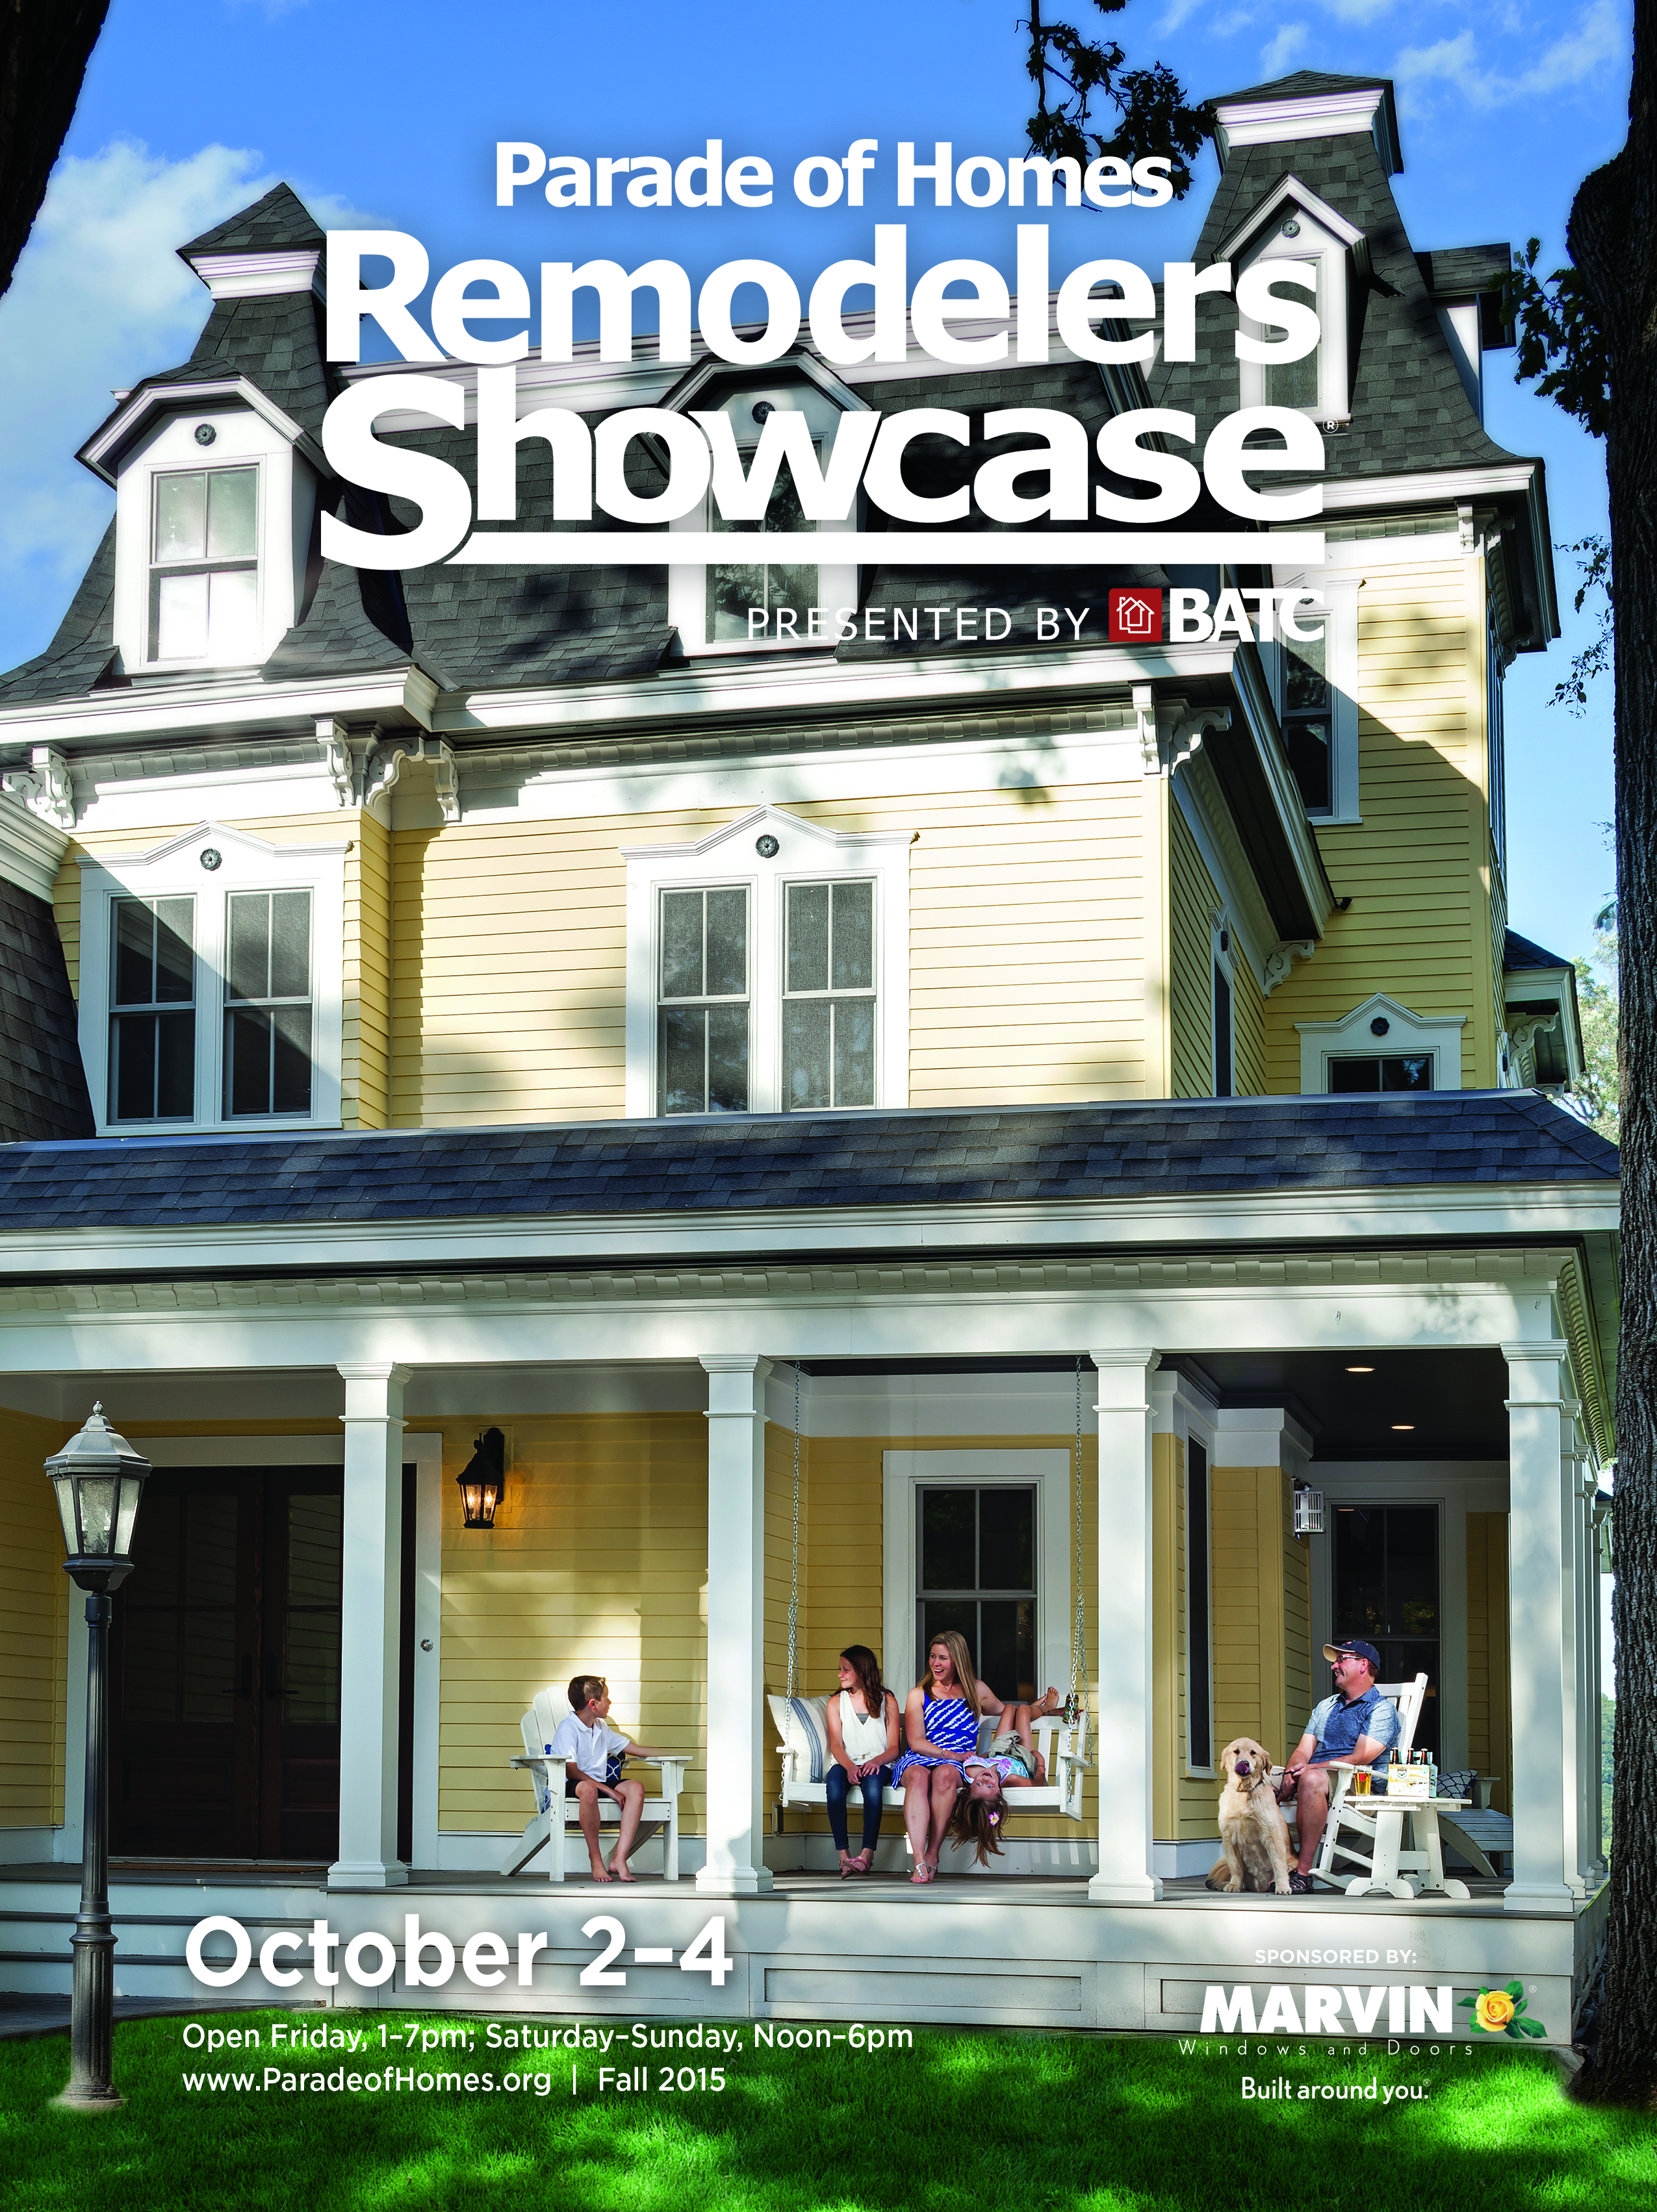 Image for Fall 2015 Parade of Homes Remodelers Showcase® Tour: October 2-4, 2015